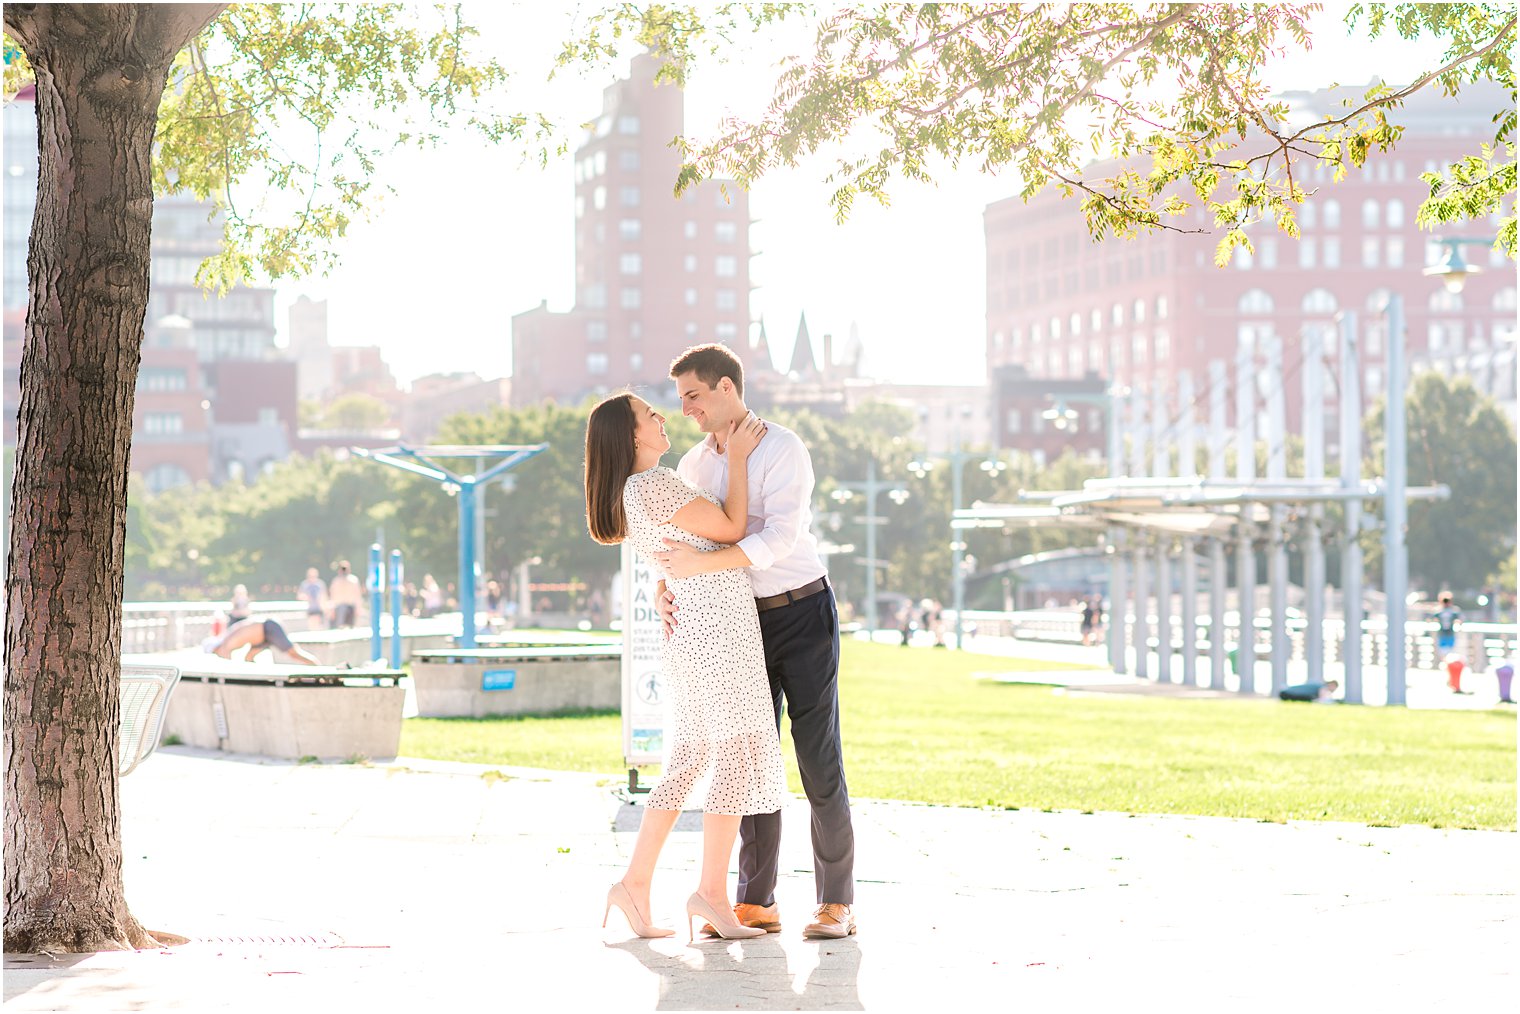 New York couple poses for engagement photos in Manhattan